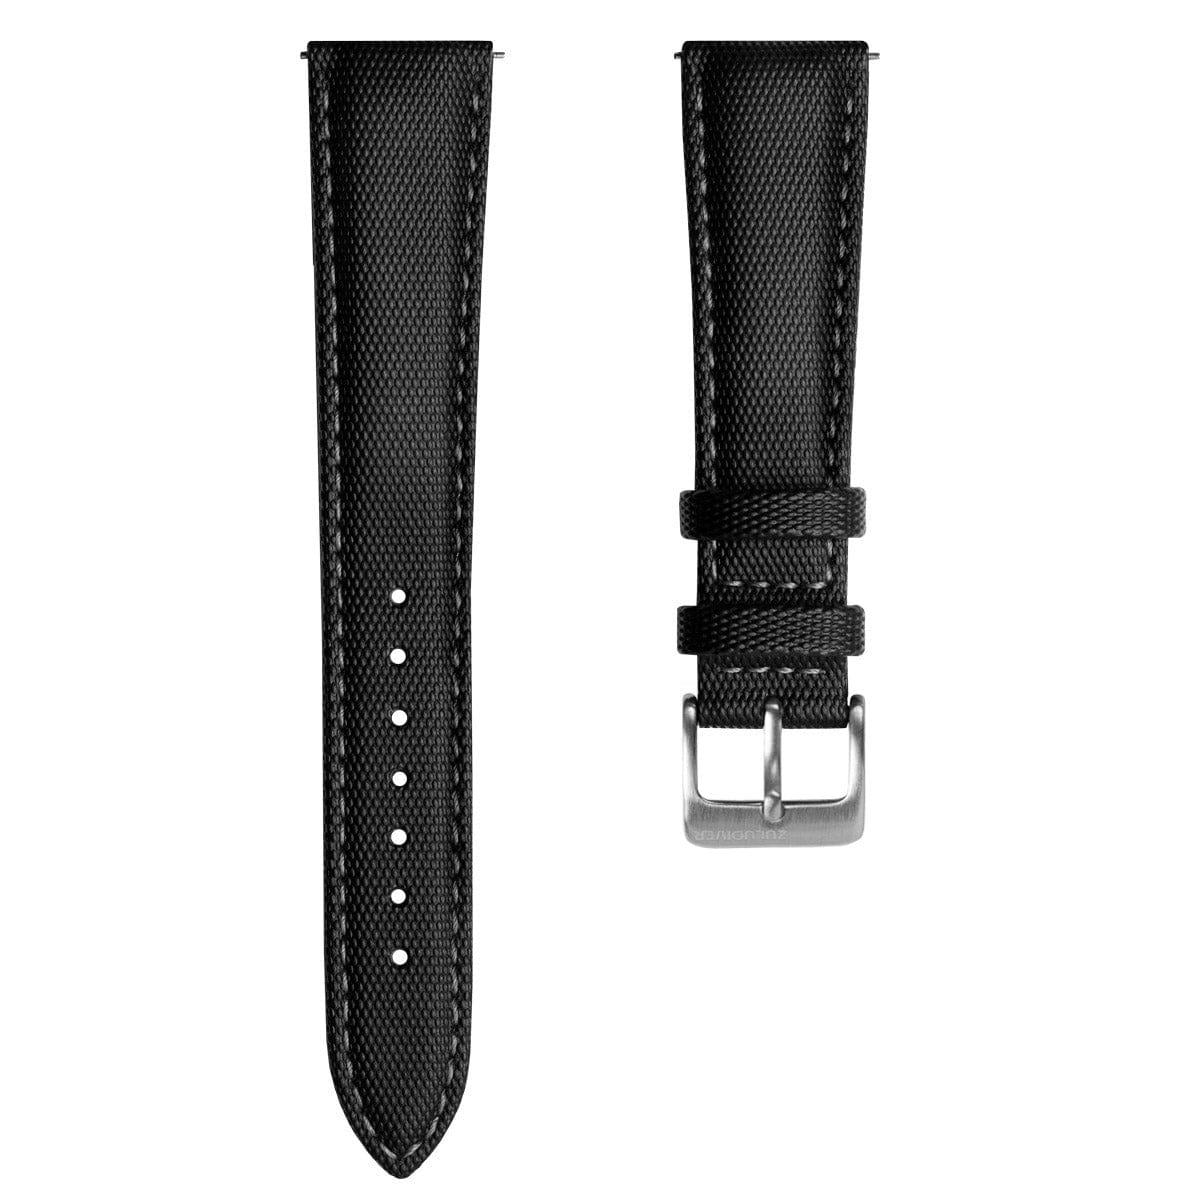 ZULUDIVER Mayday Sailcloth Padded Divers Watch Strap - Grey Stitching ...